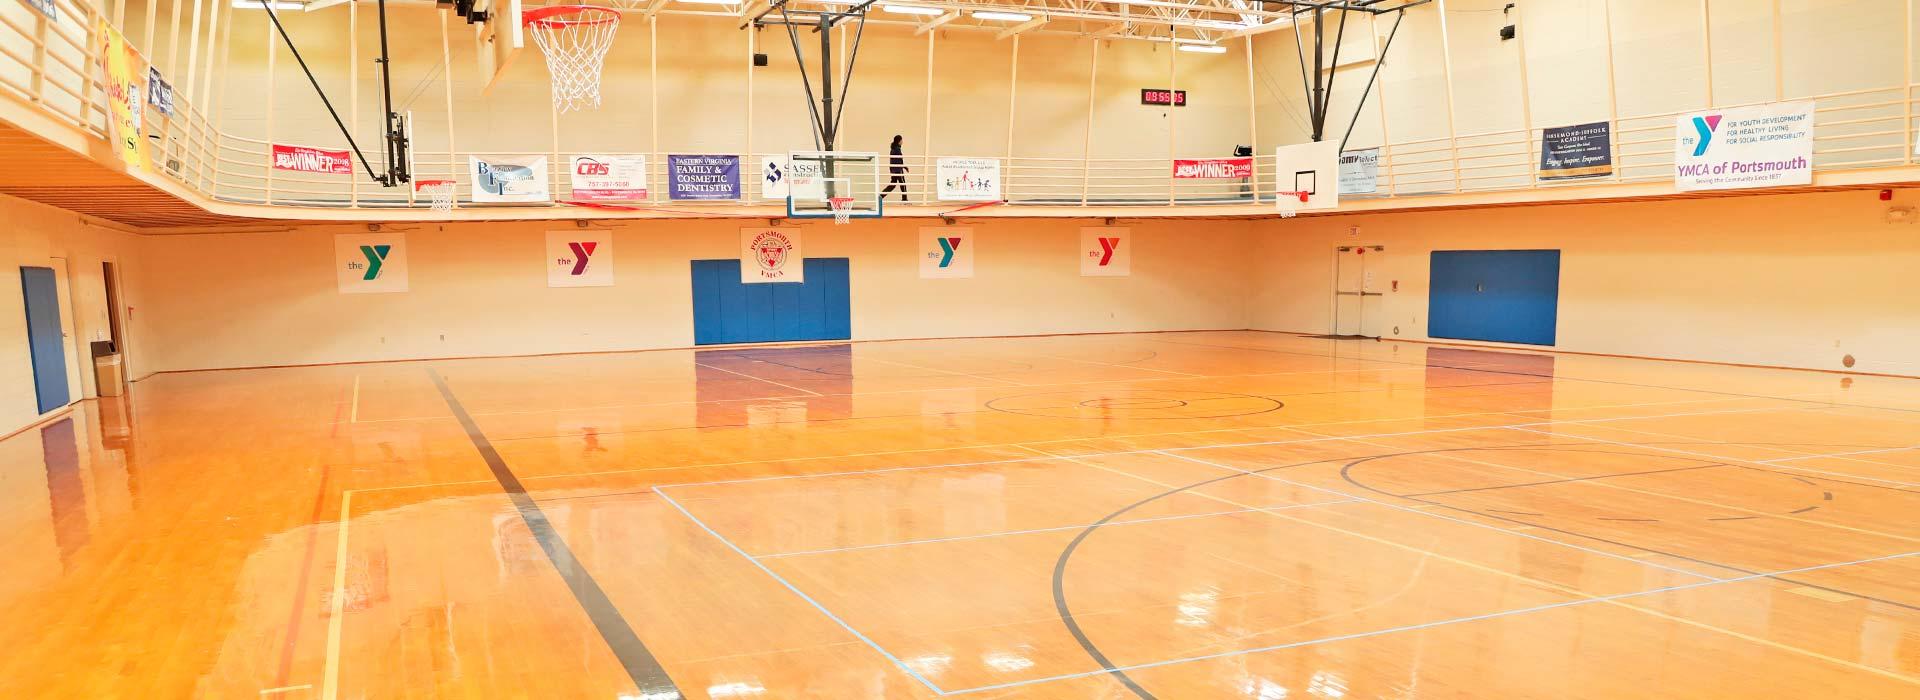 Indoor gymnasium with walking track at the Portsmouth YMCA